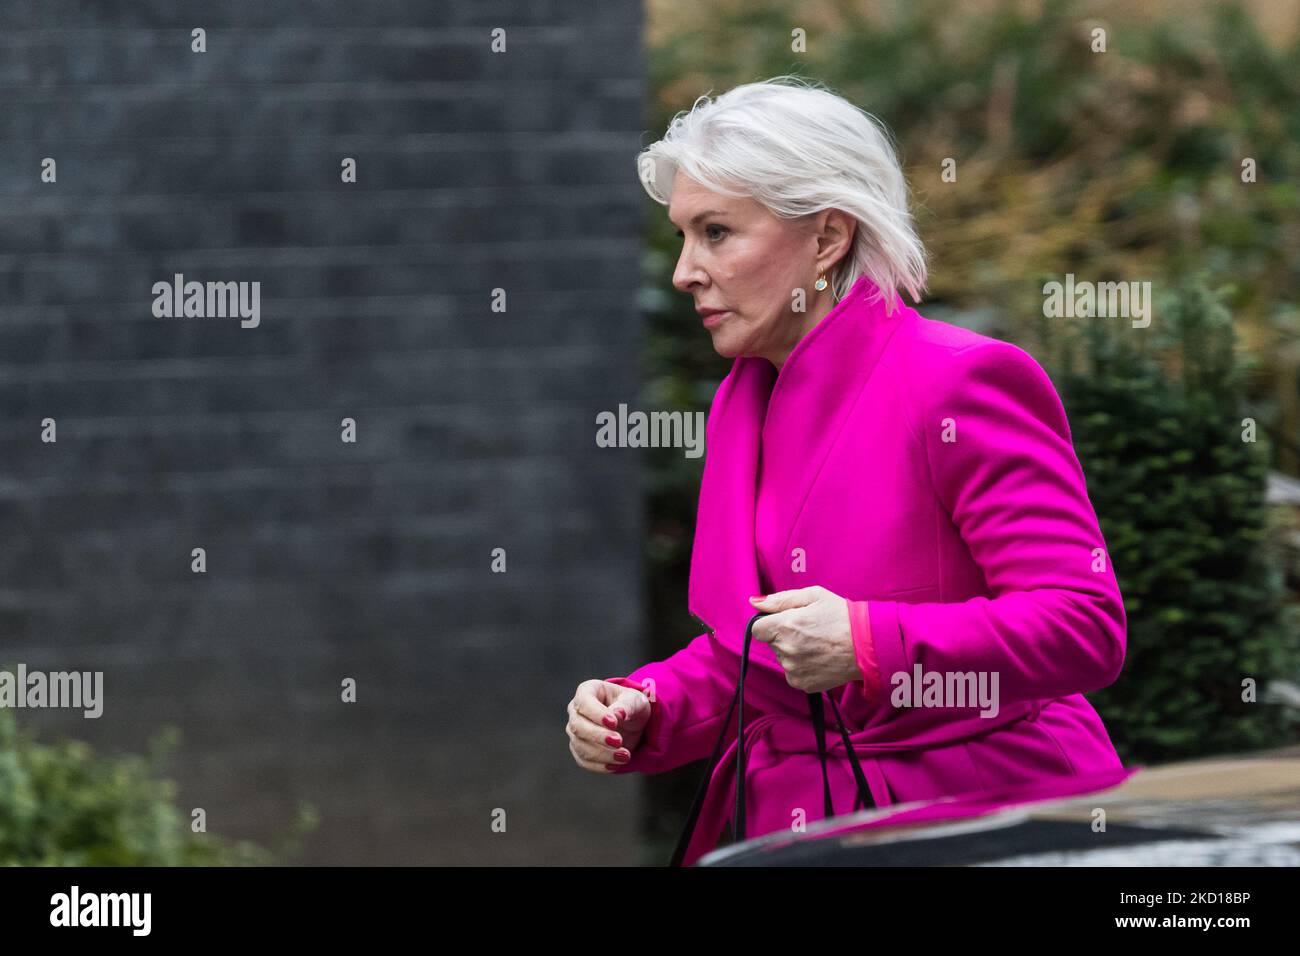 LONDON, UNITED KINGDOM - JANUARY 25, 2022: Secretary of State for Digital, Culture, Media and Sport Nadine Dorries arrives in Downing Street in central London to attend Cabinet meeting on January 25, 2022 in London, England. Senior civil servant Sue Gray is currently conducting an investigation into several alleged lockdown rule-breaking parties in Downing Street, during the time when strict Covid-19 restrictions were in place. (Photo by WIktor Szymanowicz/NurPhoto) Stock Photo